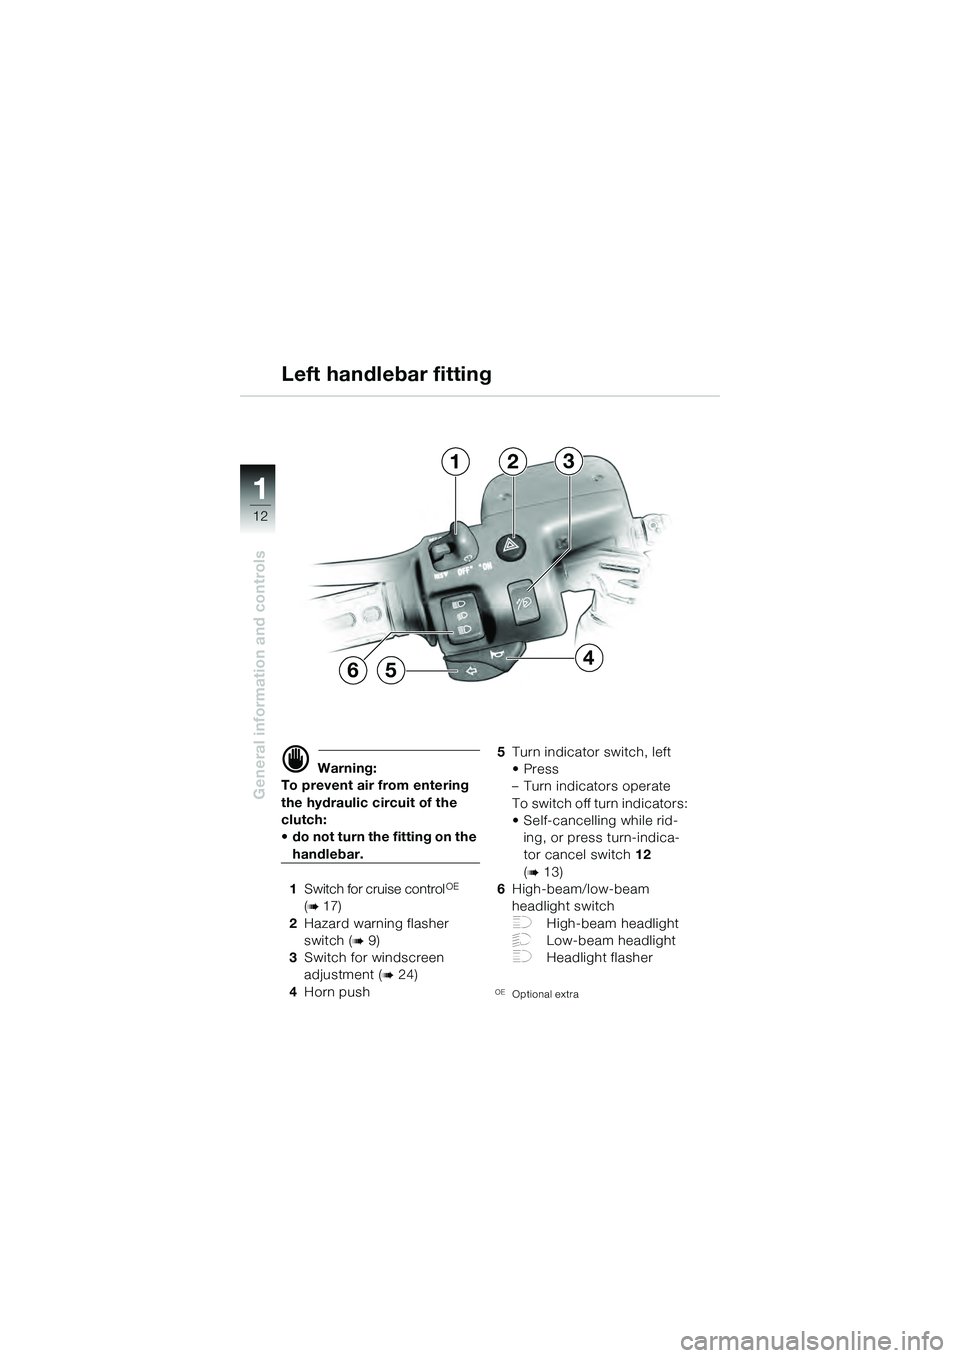 BMW MOTORRAD K 1200 GT 2004  Riders Manual (in English) 12
General information and controls
1
 Warning:
To prevent air from entering 
the hydraulic circuit of the 
clutch: 
• do not turn the fitting on the 
handlebar.
1 Switch for cruise control
OE
( 1